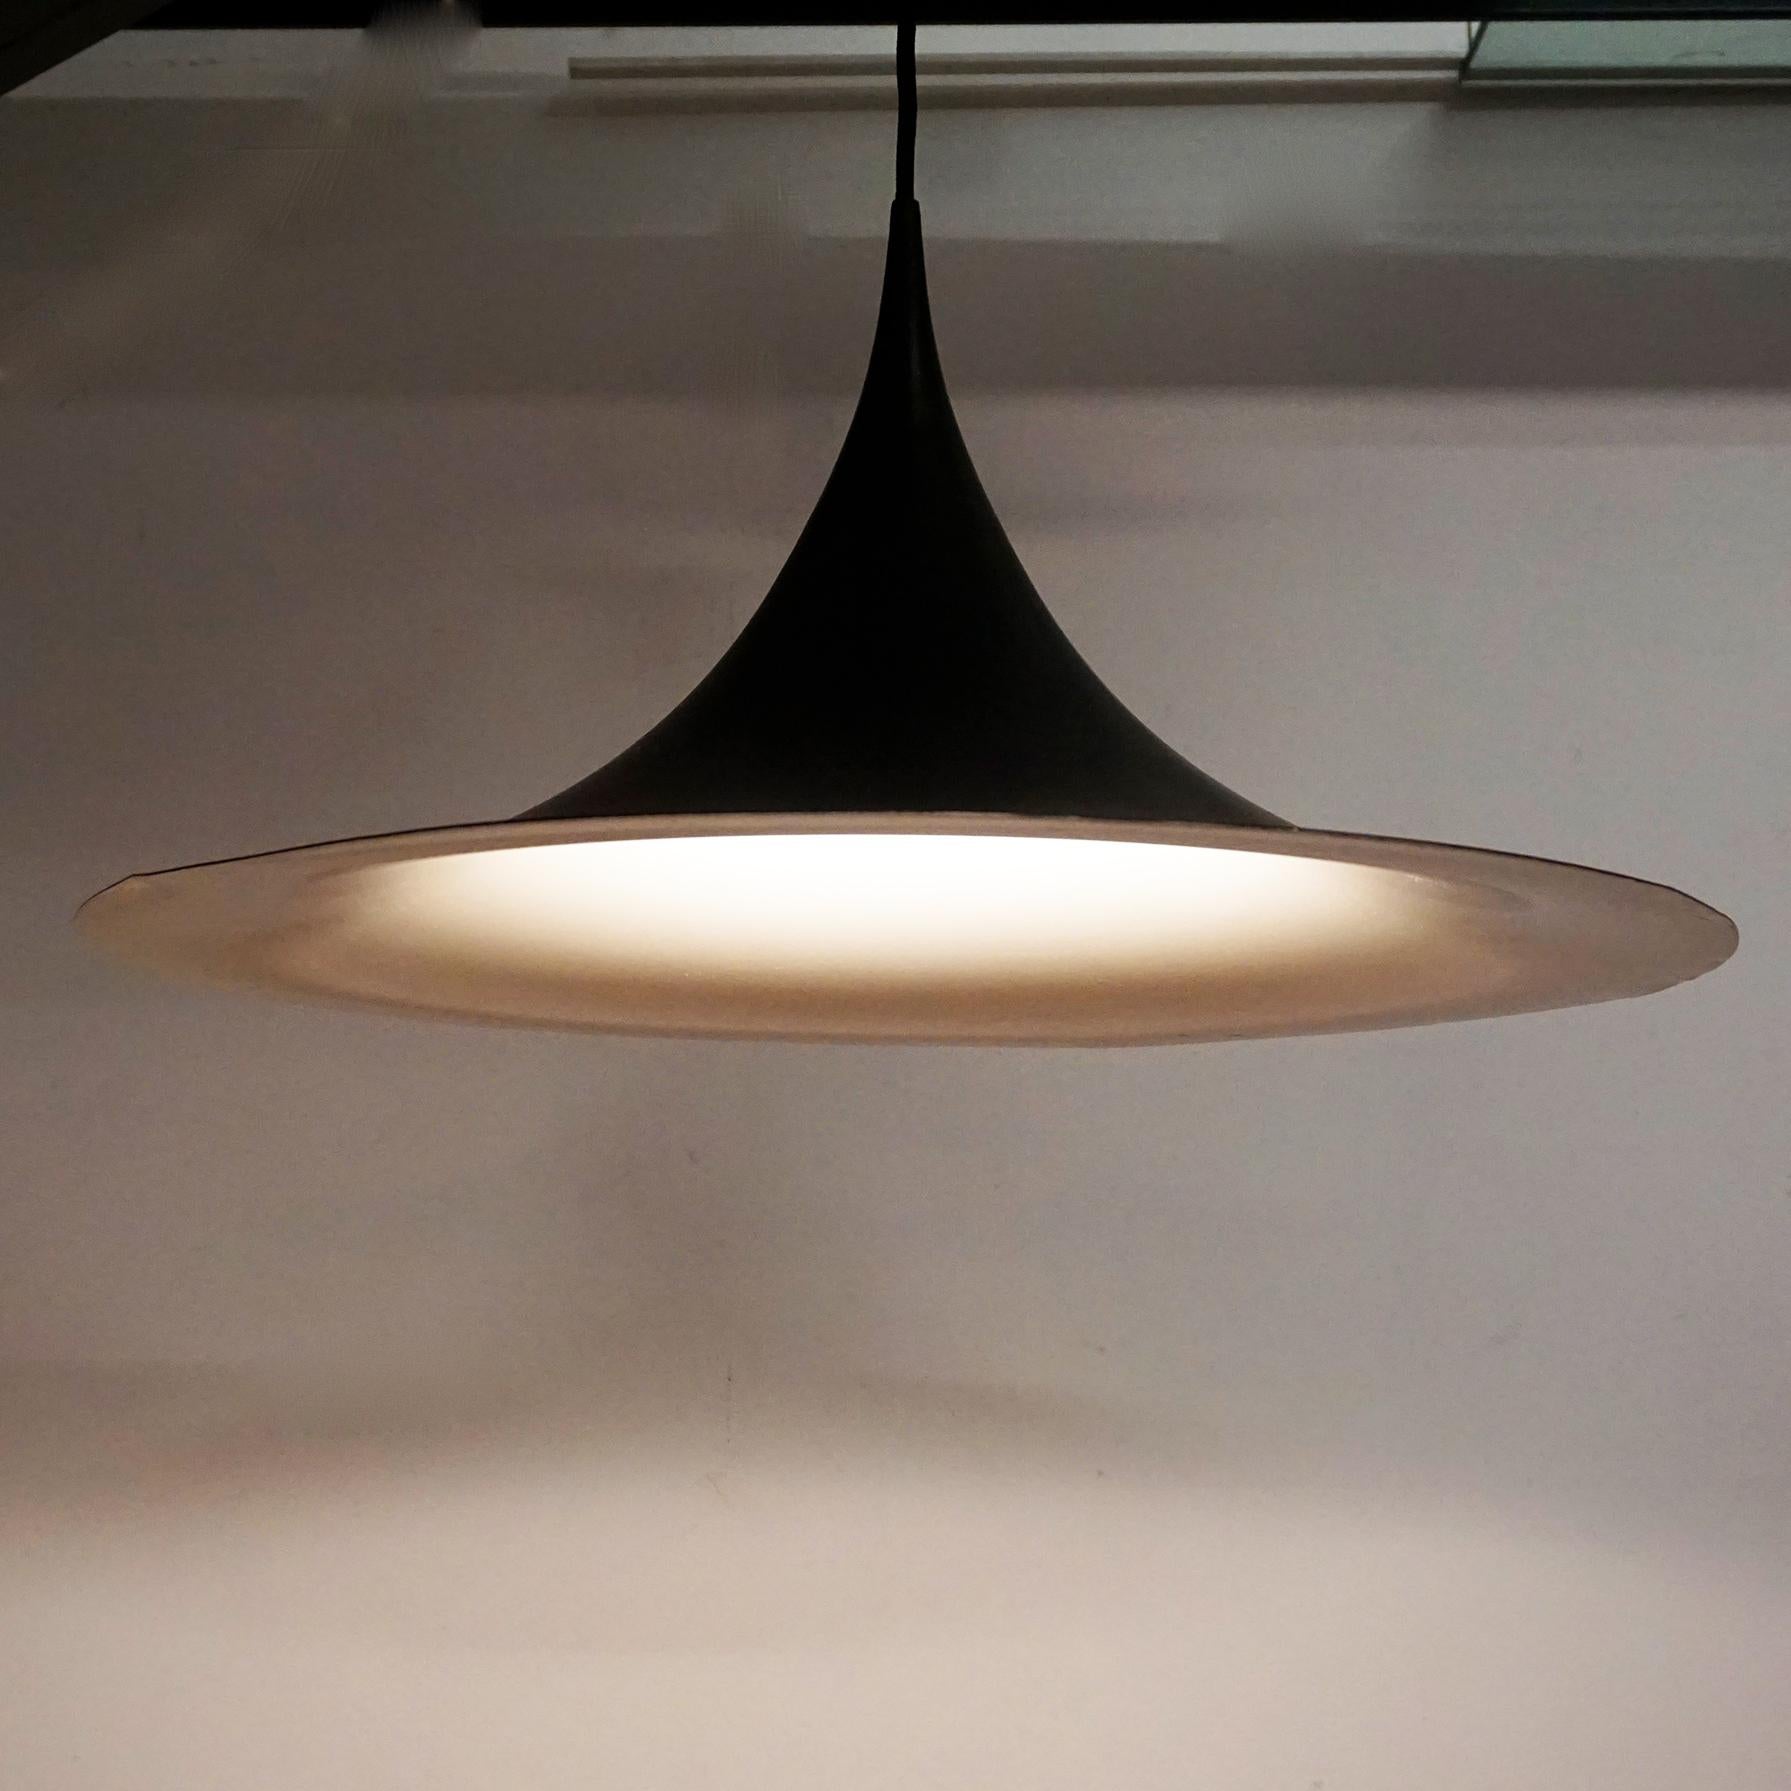 Large black lacquered Semi pendant lamp with offwhite interior. 
It has been designed by Torsten Thorup and Claus Bonderup in Denmark, 1960s and produced by Fog and Morup. Very rarely found in this size.
The Semi is one of the most iconic